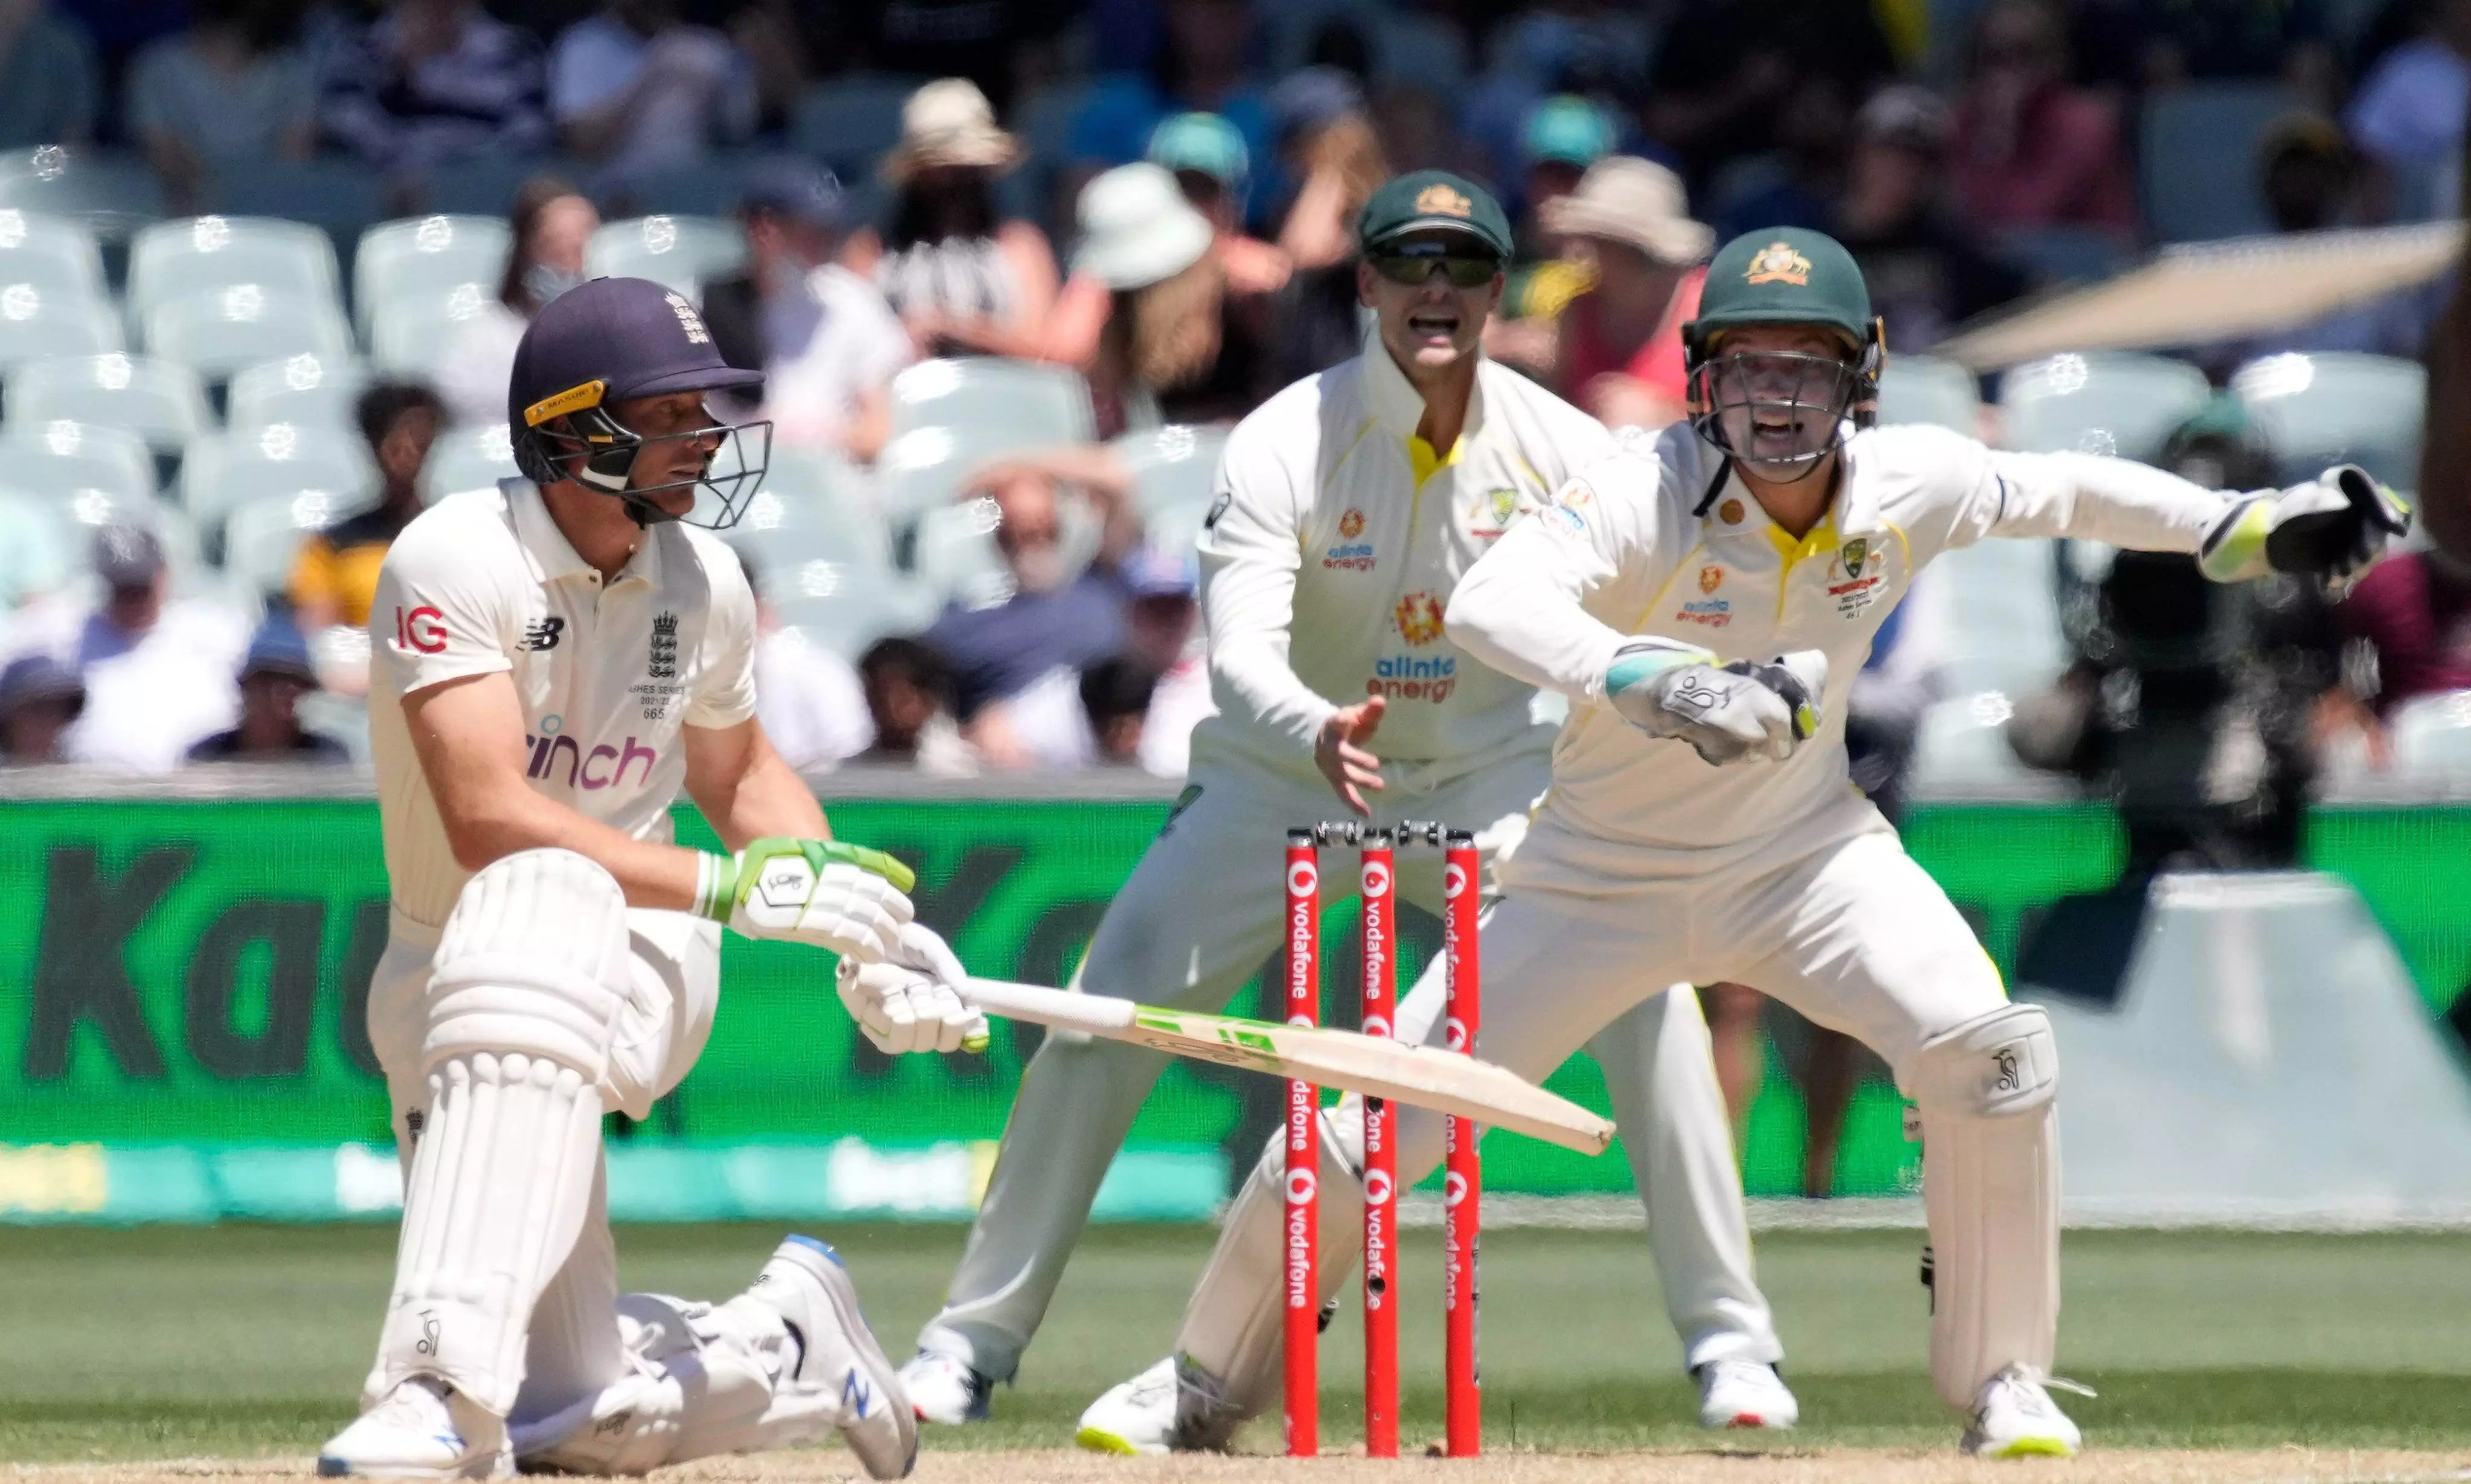 Australia wins 2nd Ashes test by 275 runs to take 2-0 lead